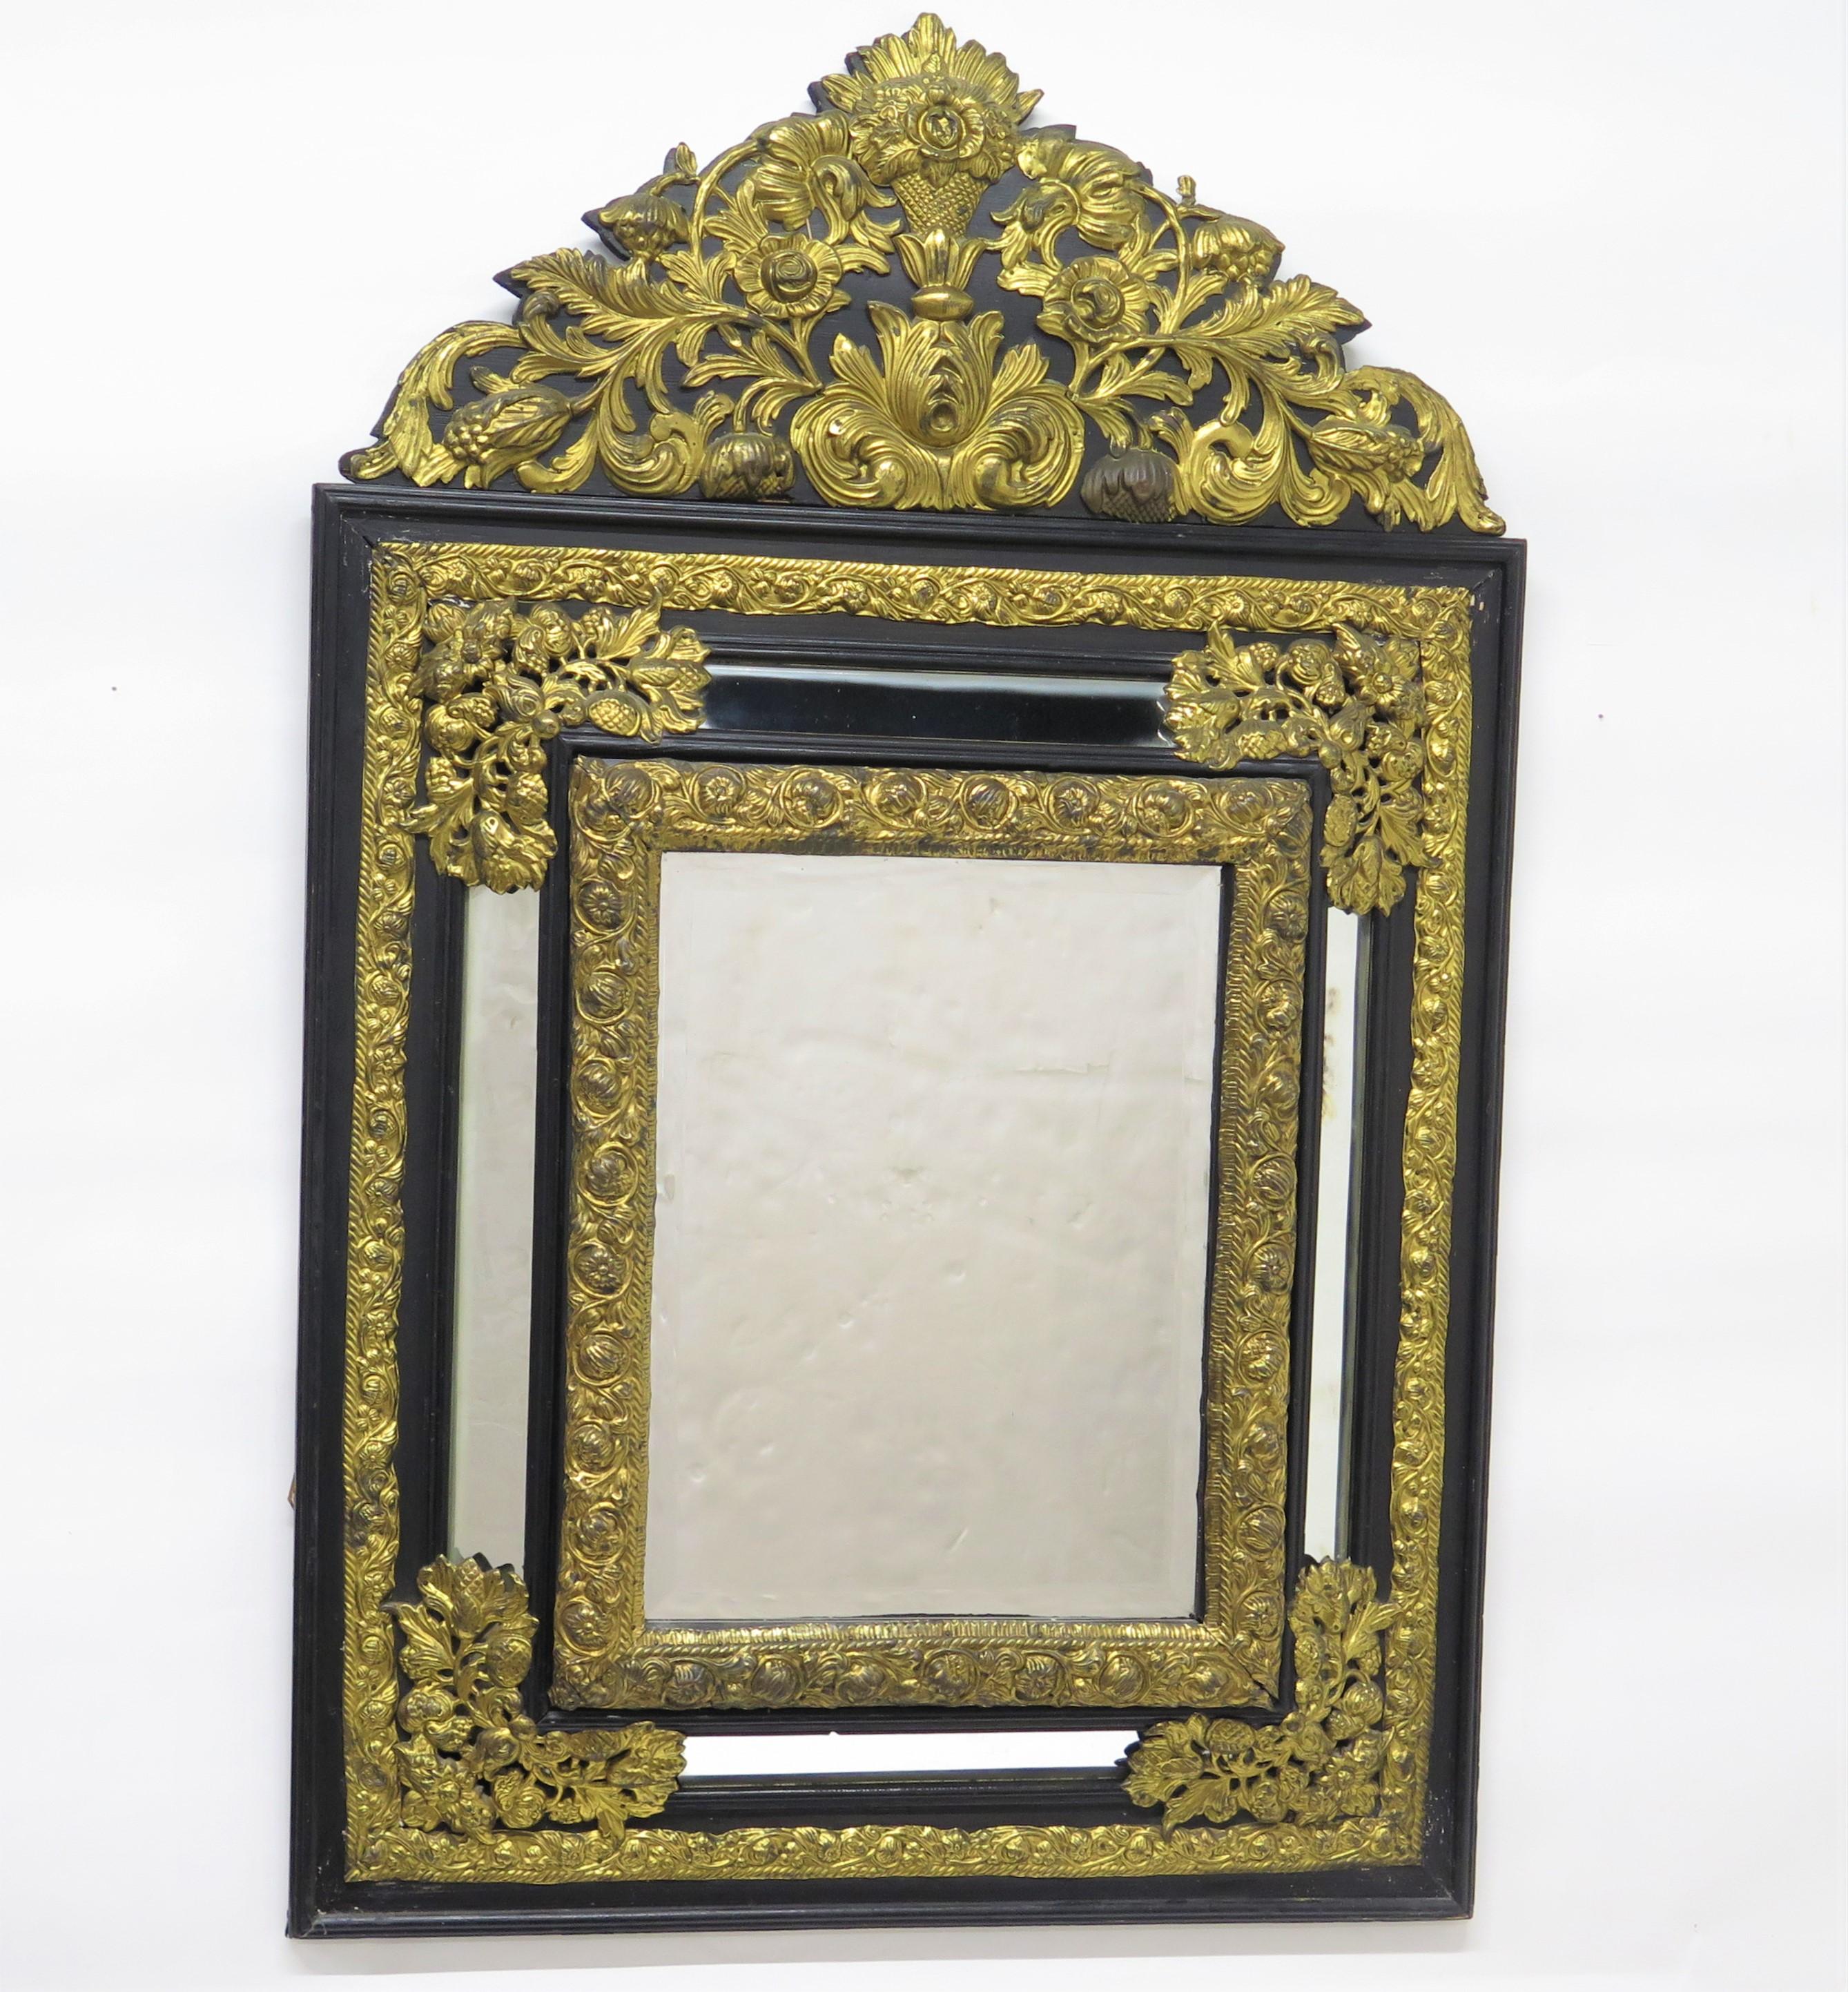 a Dutch ebony and repoussé brass mirror / looking glass with floral motifs, beveled edge glass in the center, Holland (The Netherlands), 19th century